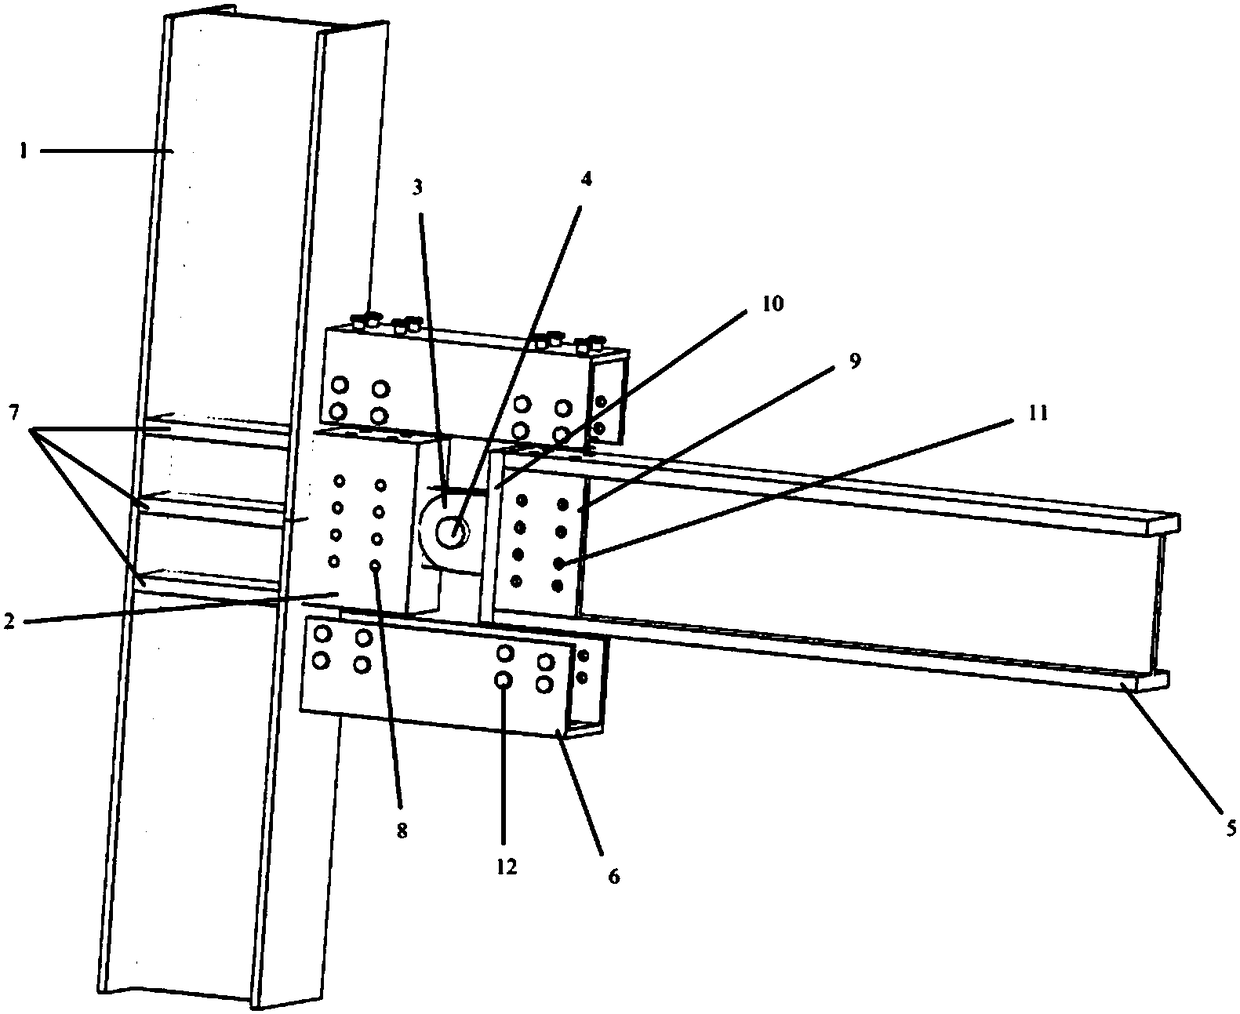 A beam-column joint of energy-dissipating steel structures with replaceable combined steel plates